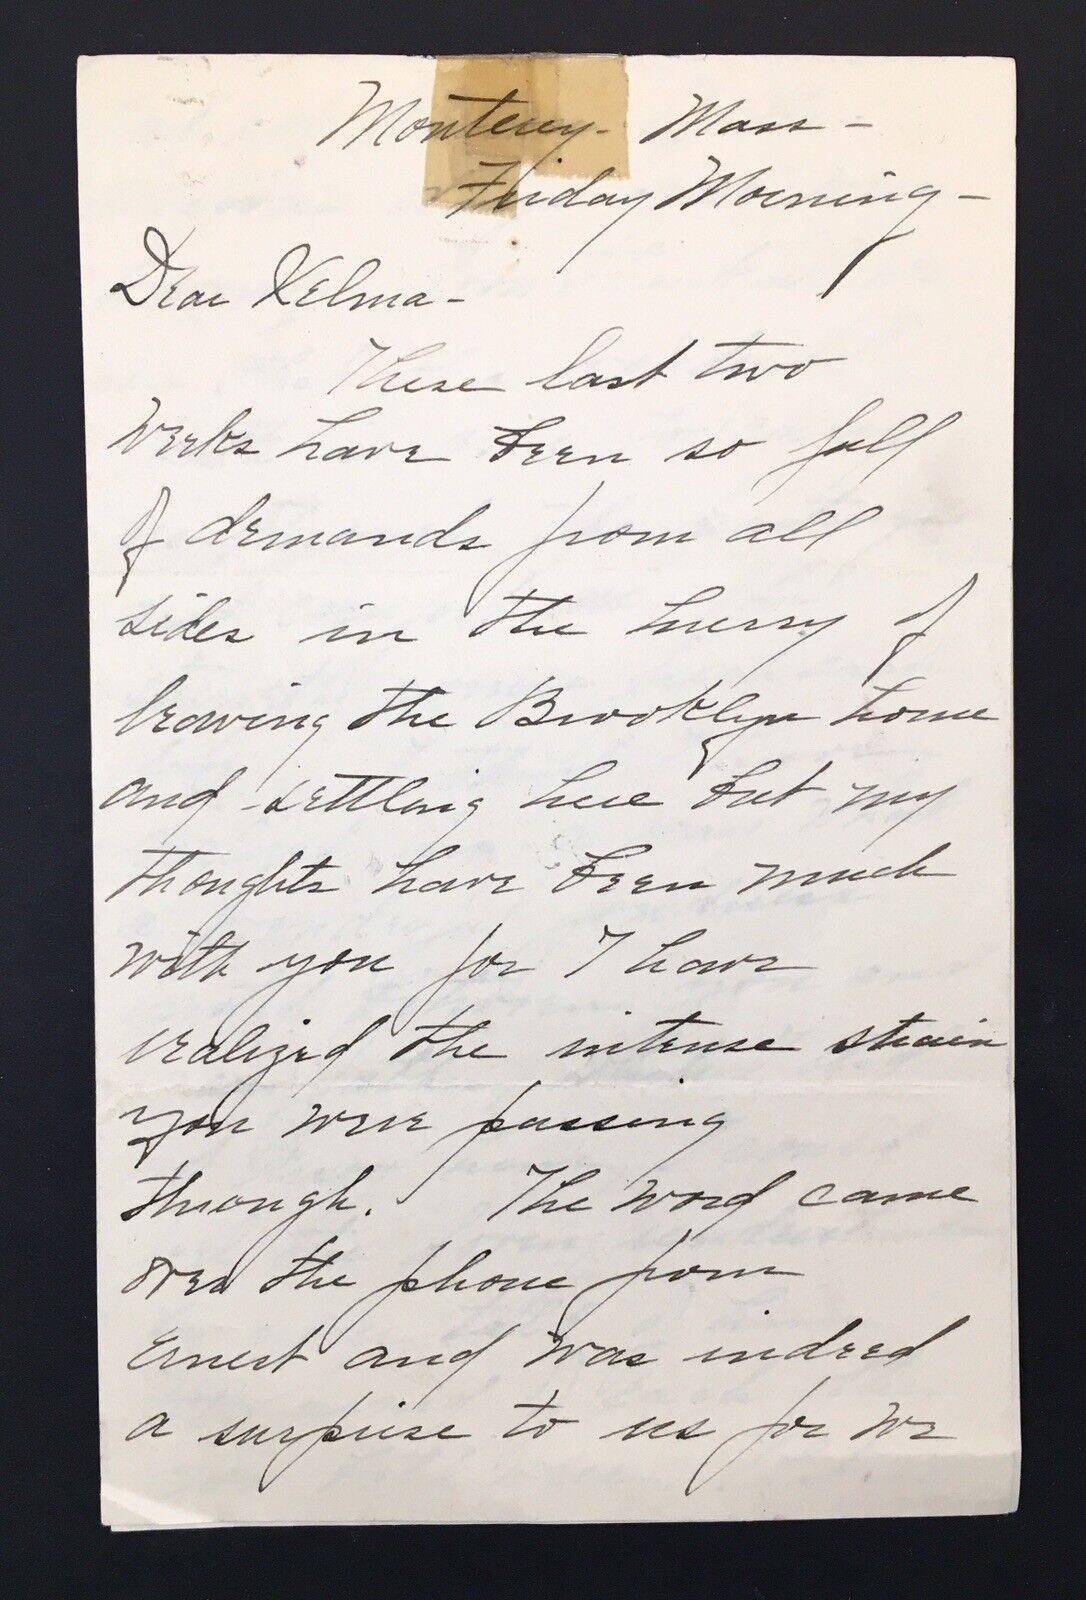 1924 Horace Swetland Condolence Letter to His Daughter Velma Handwritten 3 Pages